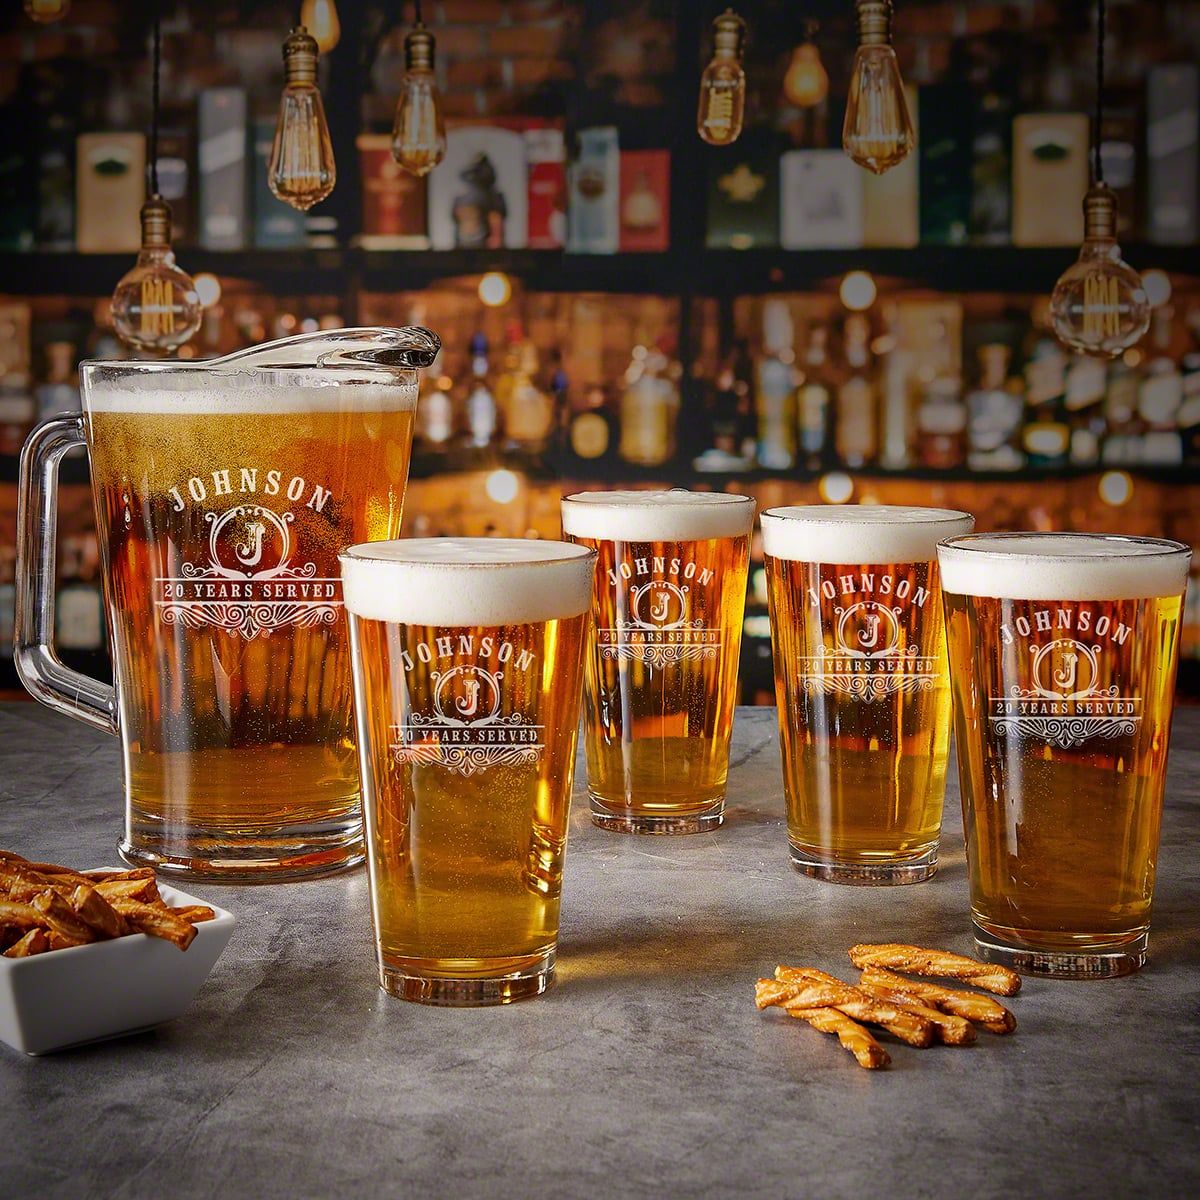 https://images.homewetbar.com/media/catalog/product/p/e/personalized-beer-pitcher-pint-glasses-set-carraway-p-10810.jpg?store=default&image-type=image